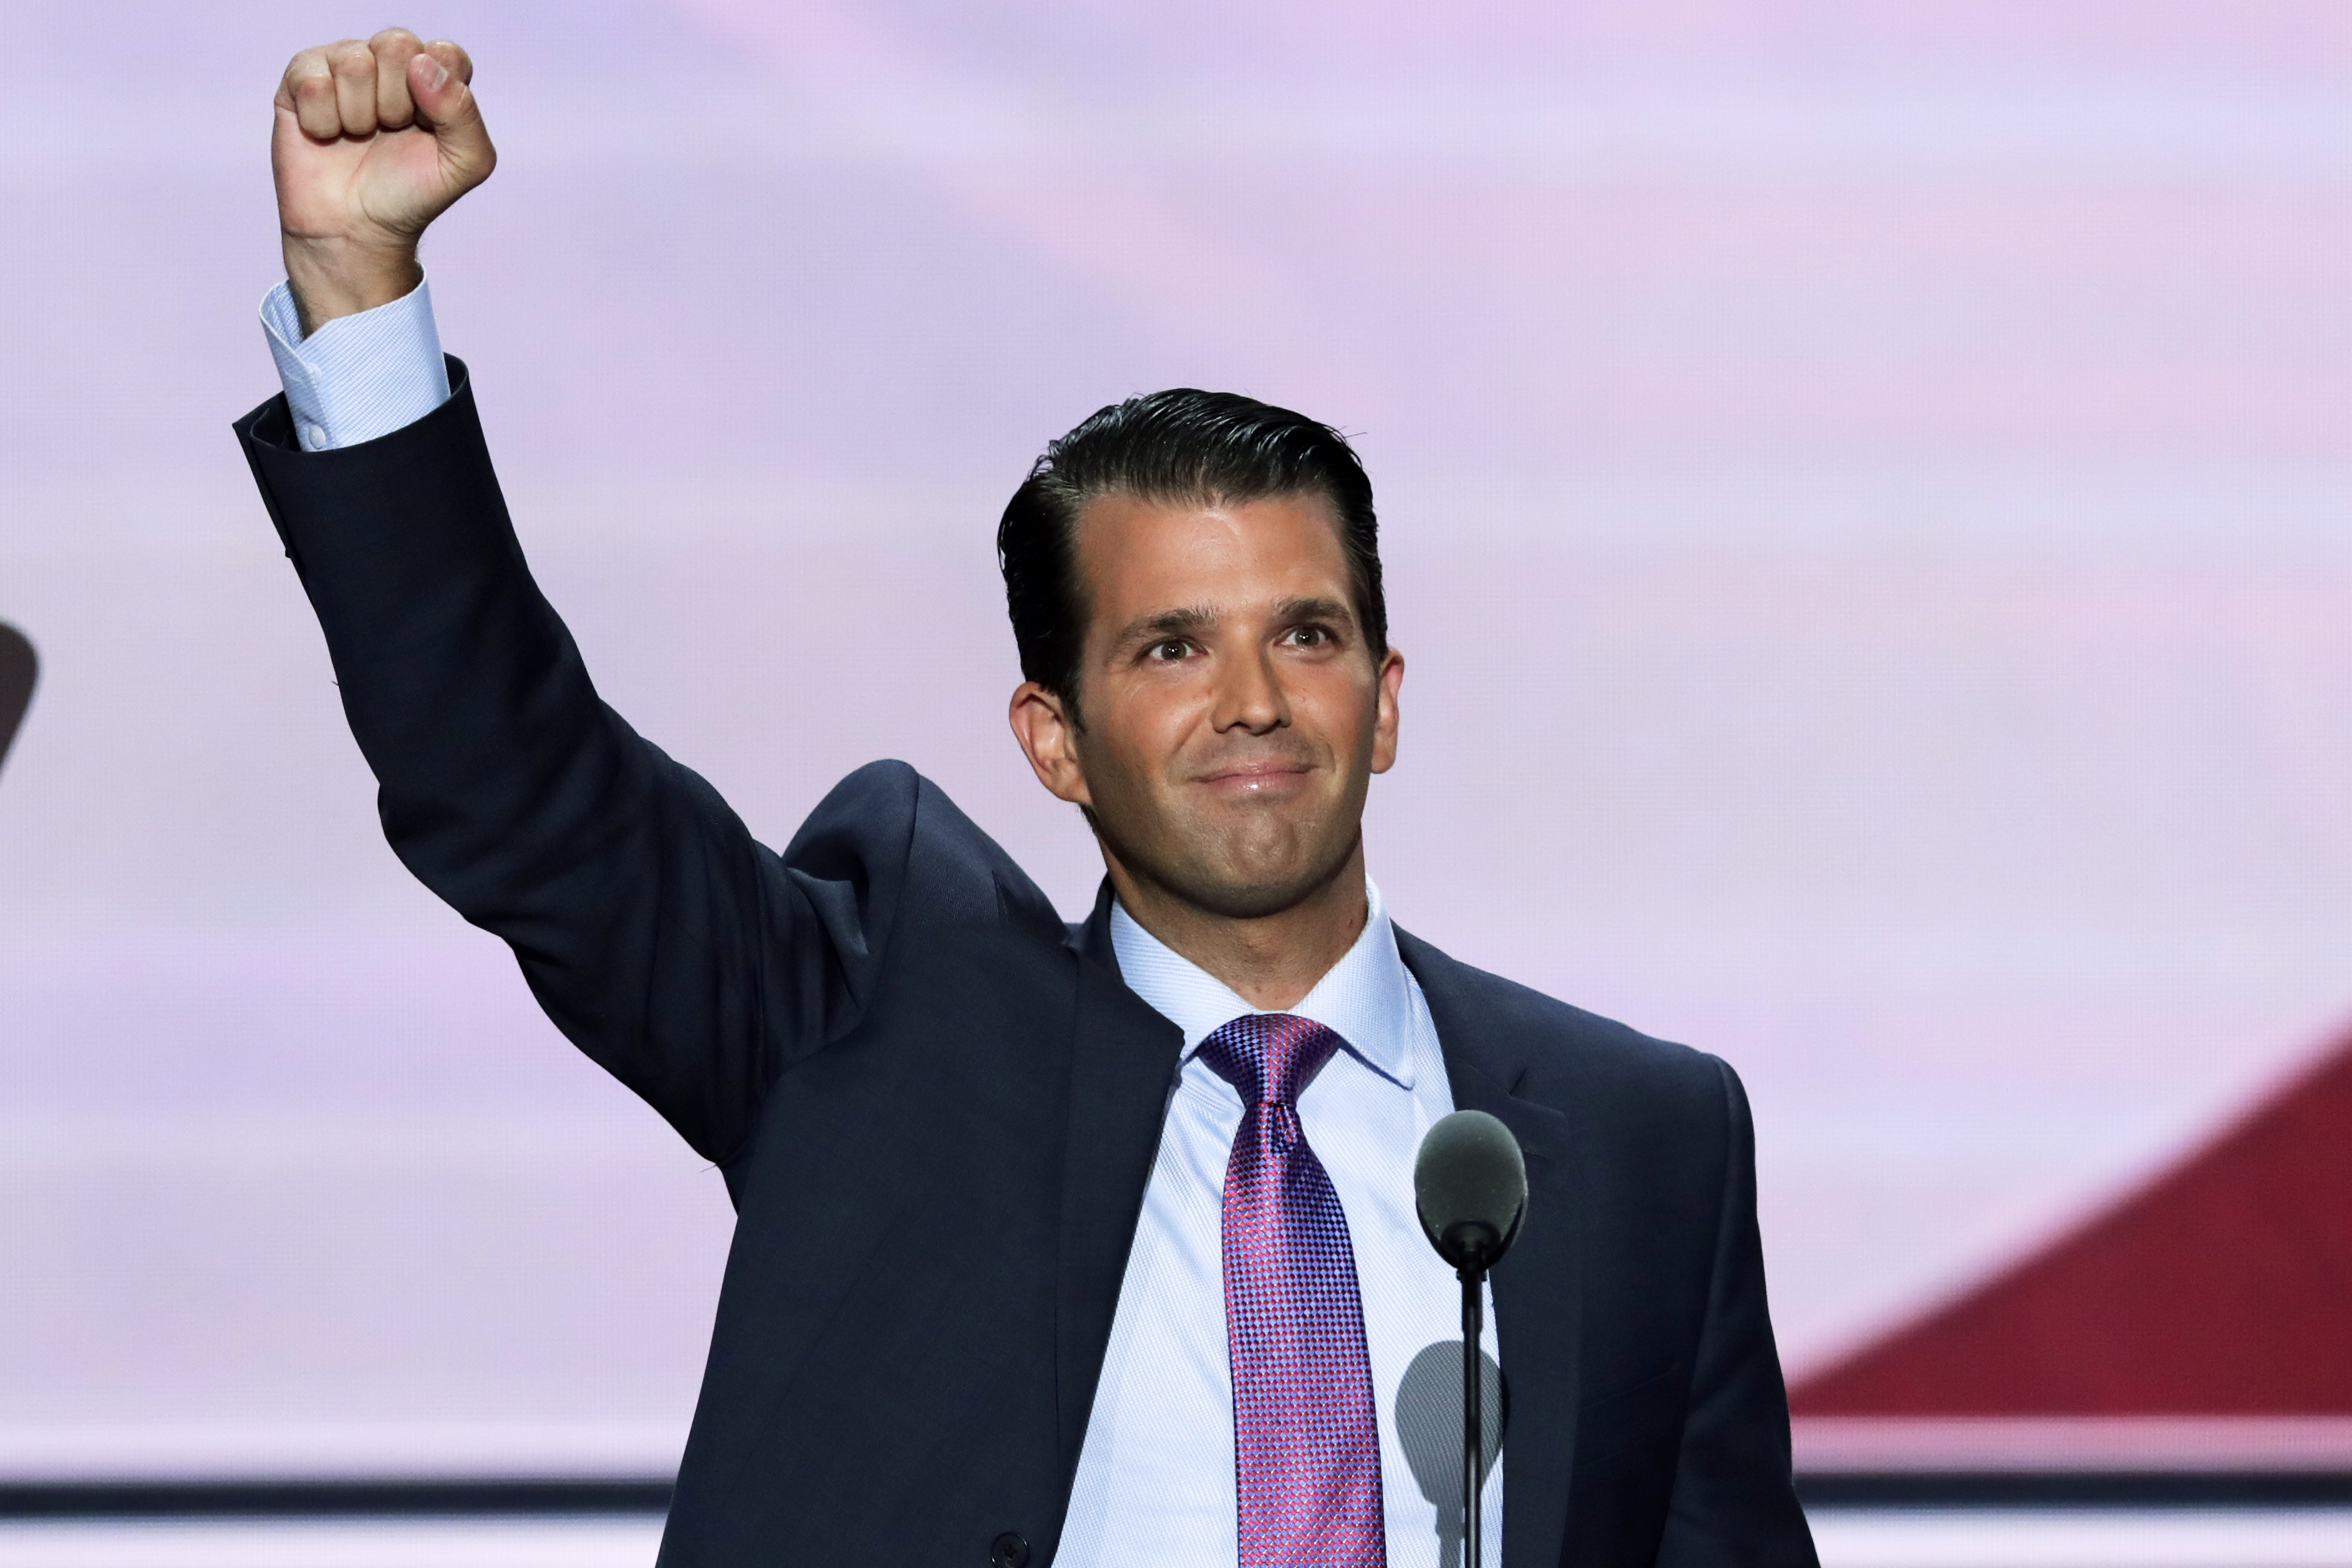 Donald Trump, Jr., son of Republican Presidential Candidate Donald Trump, lifts his fist after speaking during the second day of the Republican National Convention in Cleveland on July 19, 2016. (J. Scott Applewhite—AP)